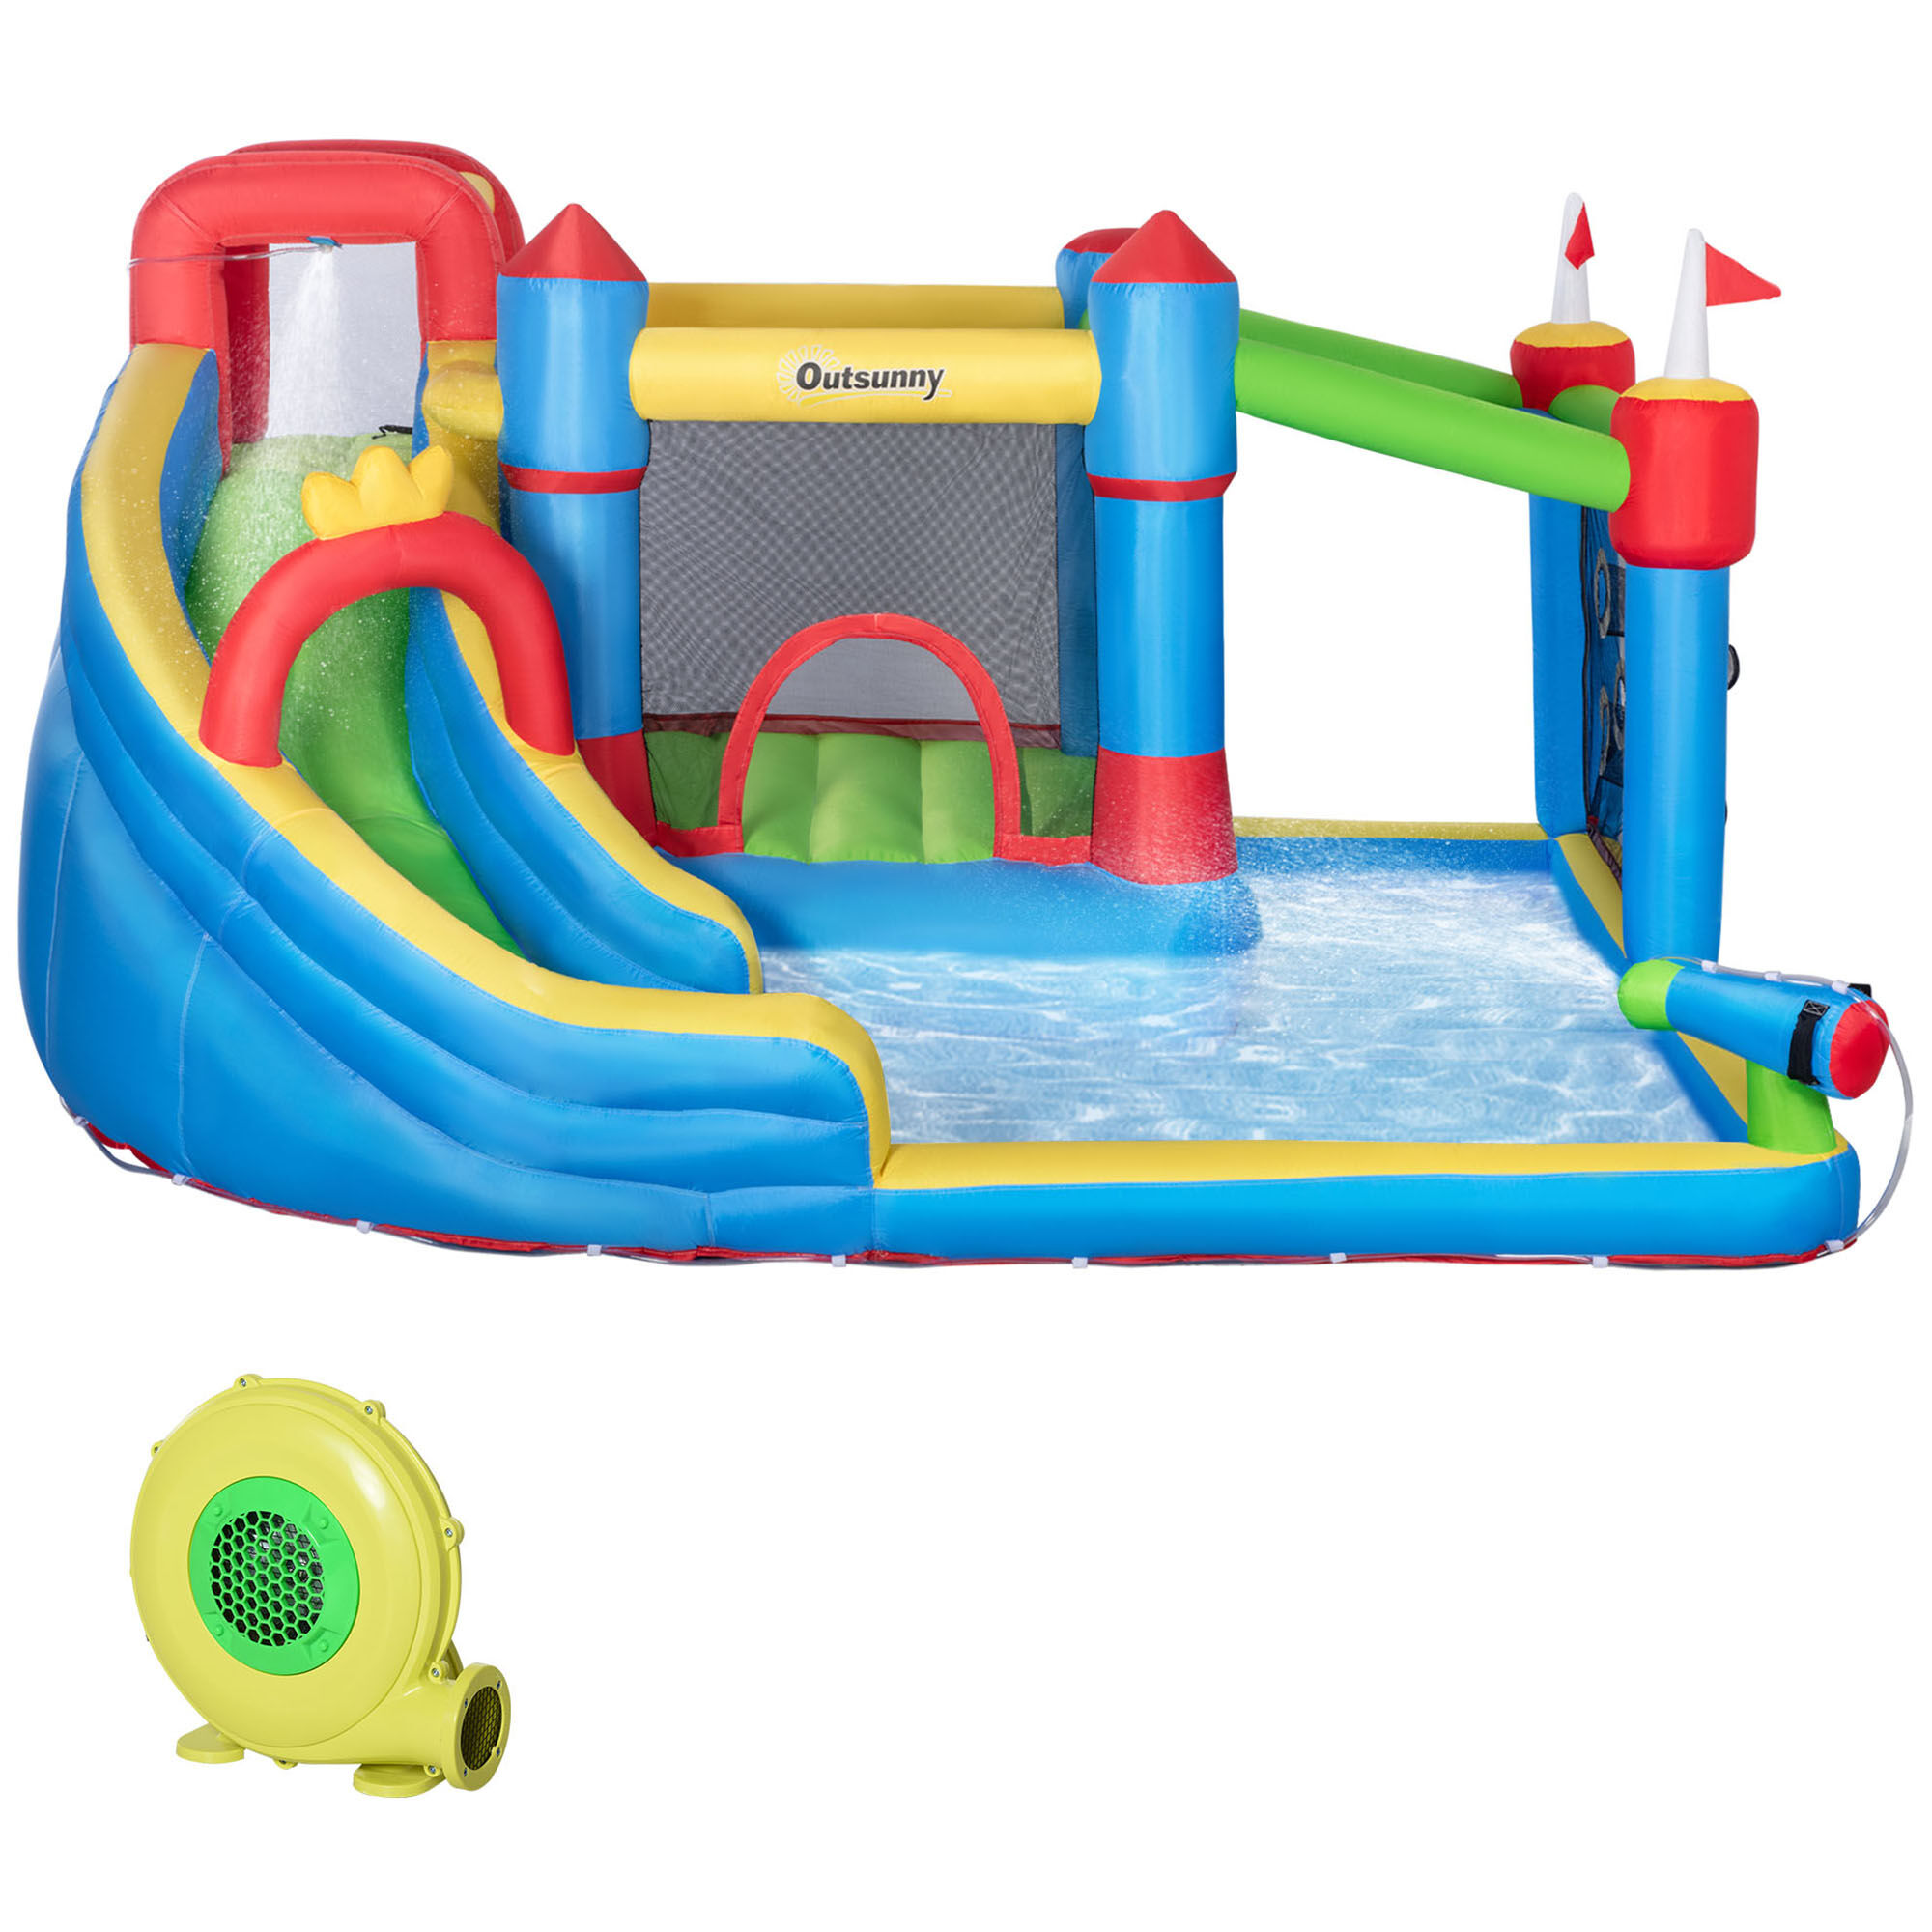 Outsunny Inflatable Water Slide Park 6-in-1 Kids Bounce House Castle with Pool Cannon Slide Trampoline Throwing Wall 450W Blower   Aosom.com